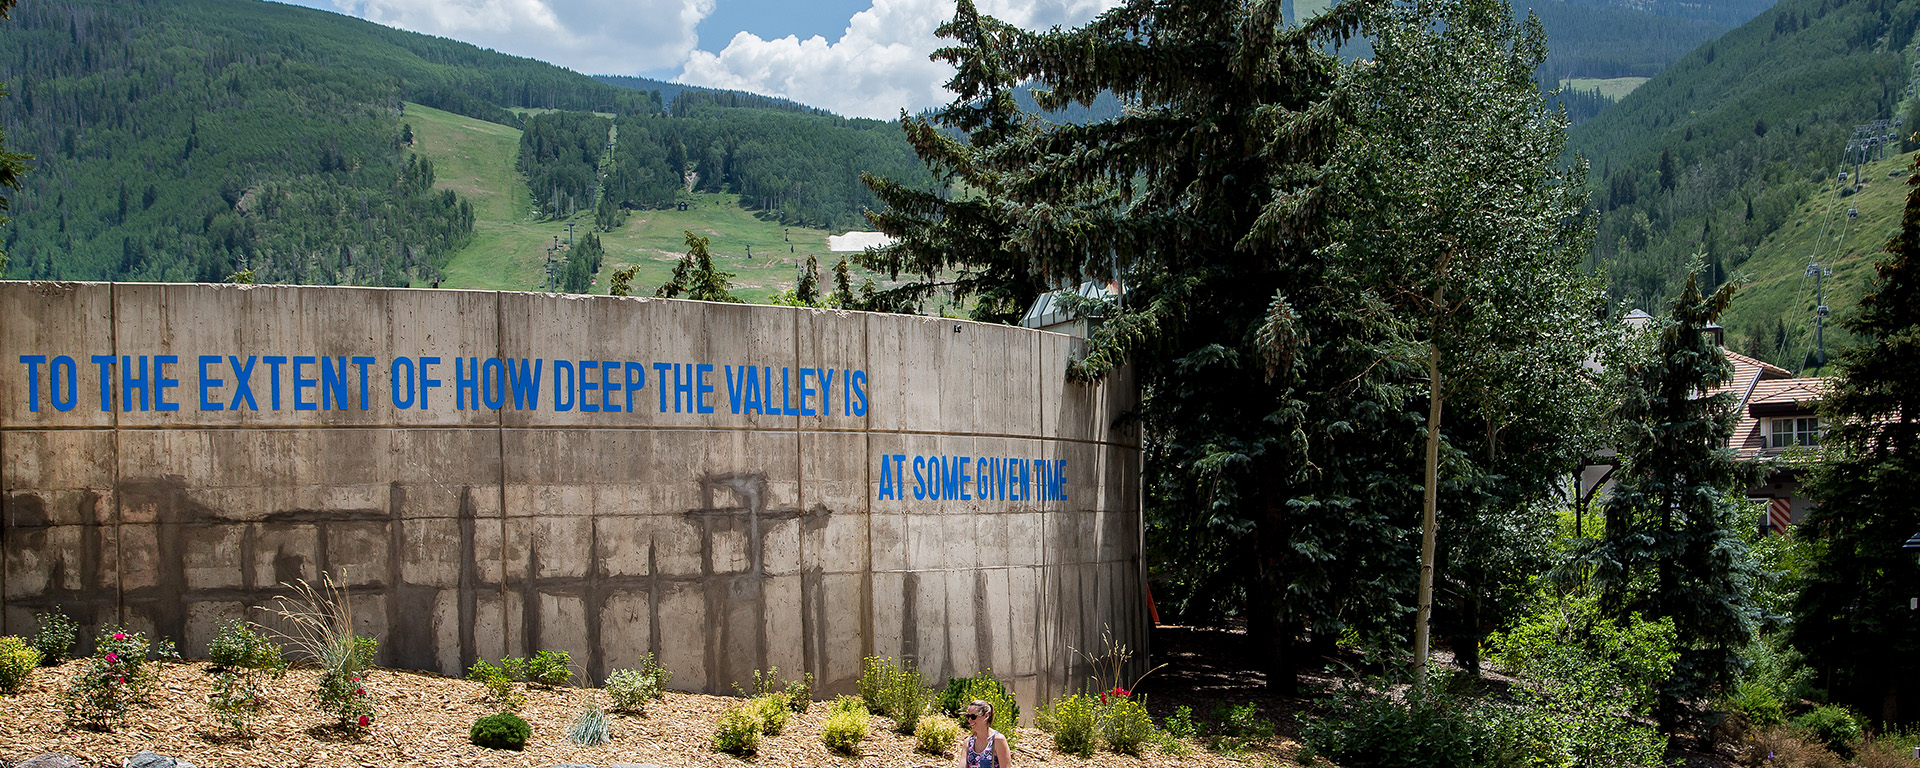 Art in Vail Hero Image TO THE EXTENT OF HOW DEEP THE VALLEY IS AT SOME GIVEN TIME